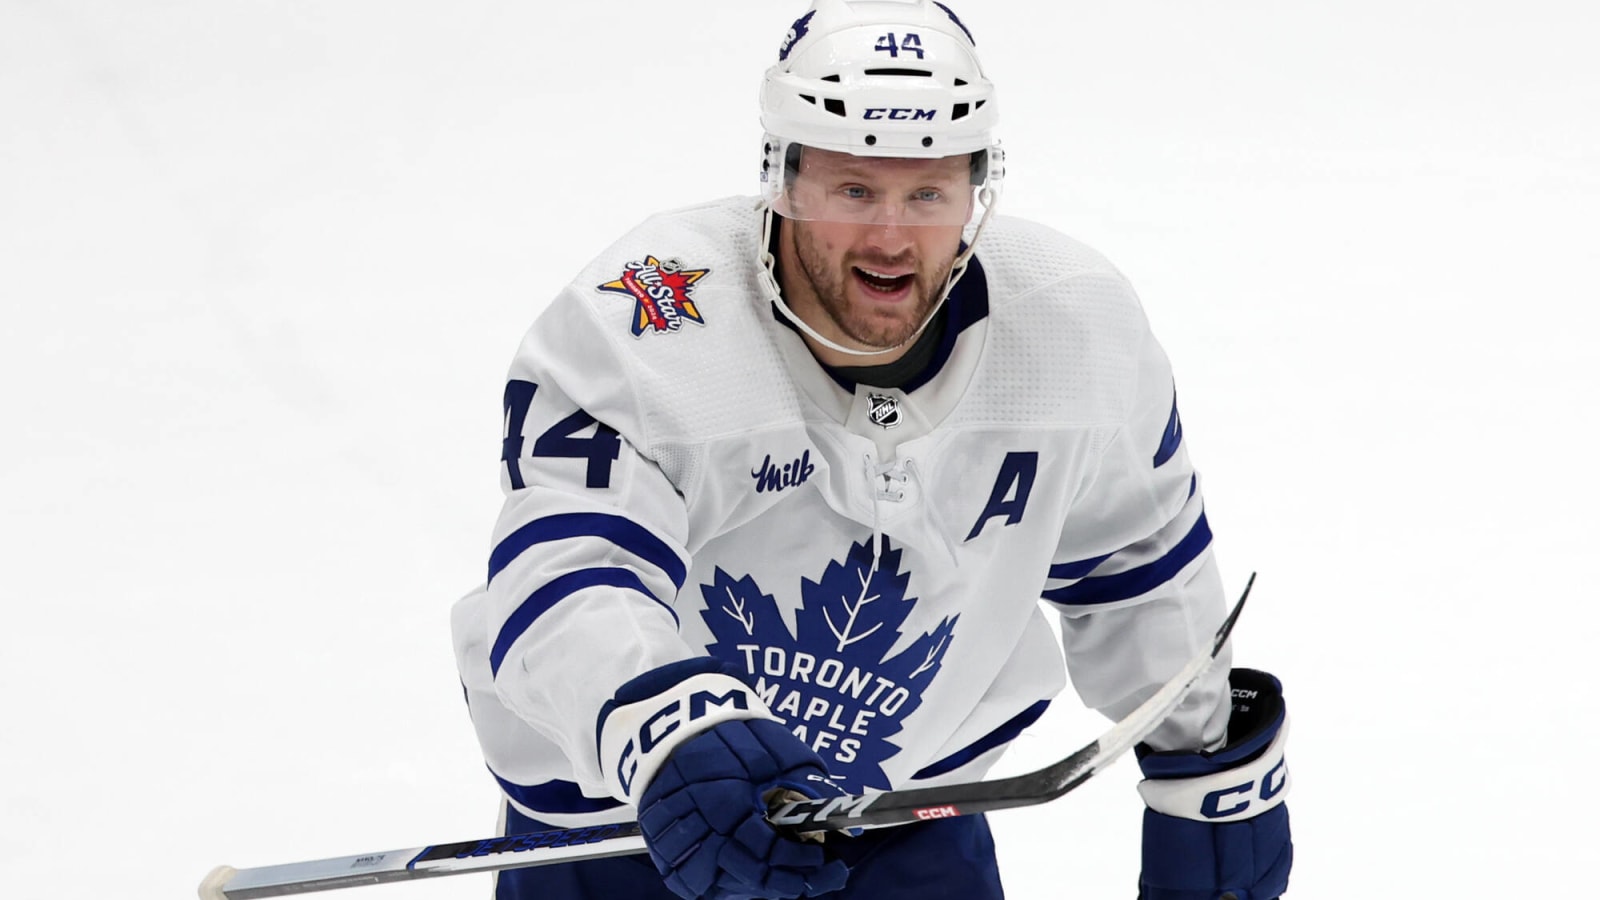 ‘It’s going to take an extra effort’: Toronto Maple Leafs preparing for Morgan Rielly’s absence